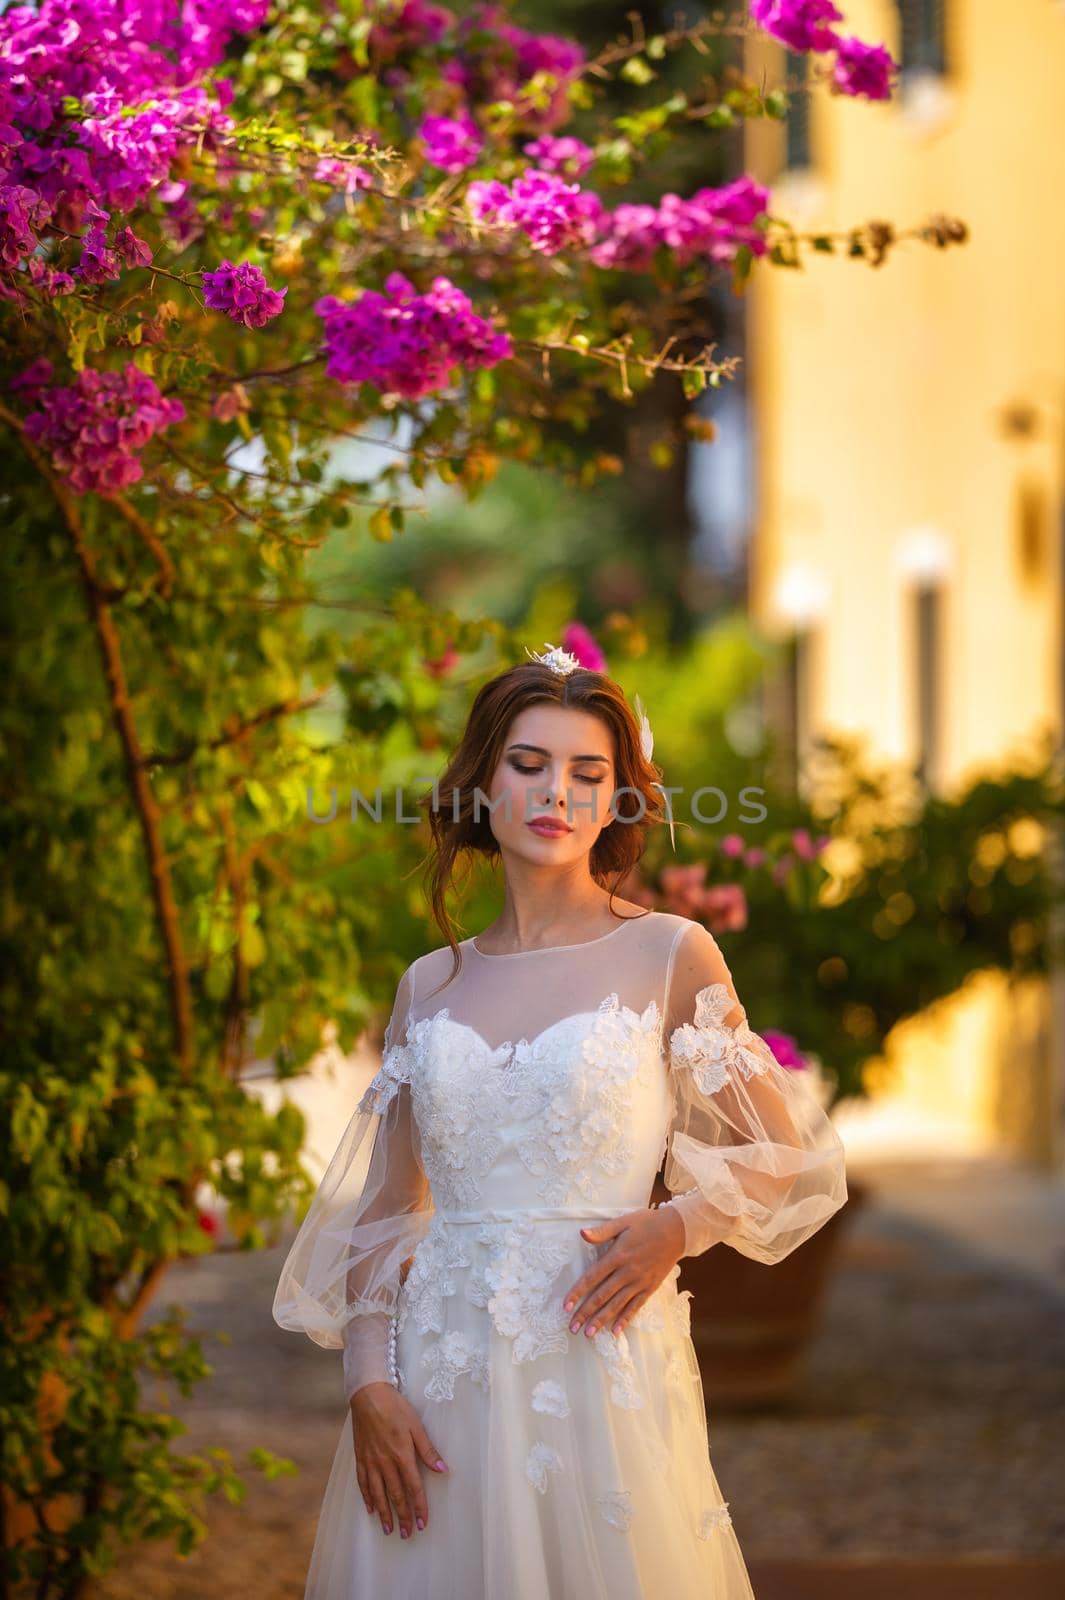 Stylish young bride on her wedding day in Italy.elegant Bride from Tuscany.Bride in a white wedding dress by Lobachad